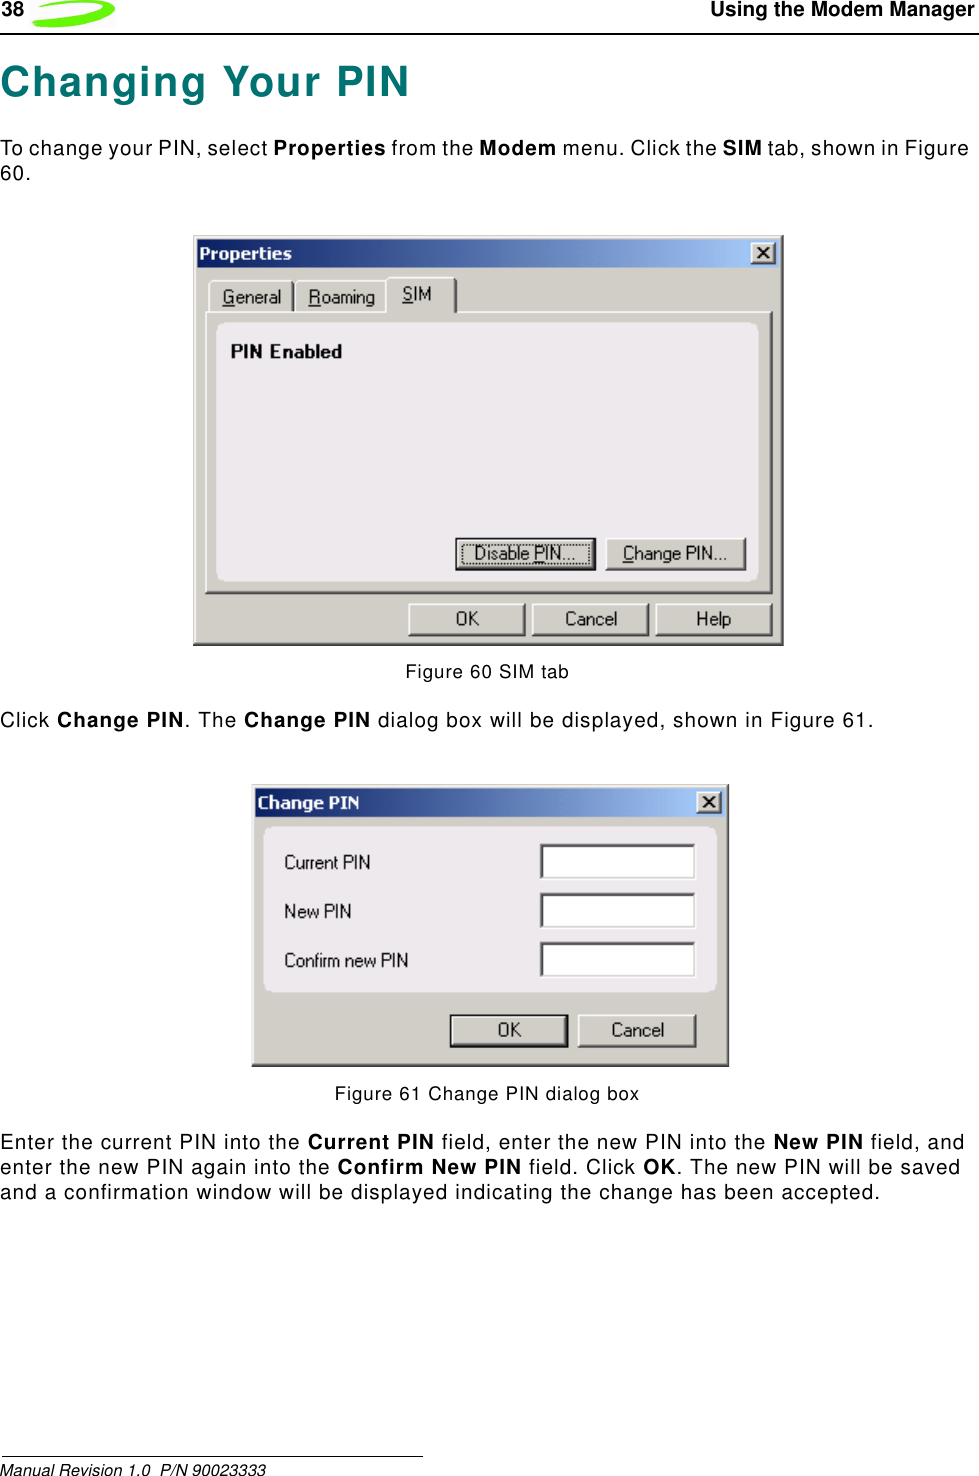 38  Using the Modem ManagerManual Revision 1.0  P/N 90023333Changing Your PINTo change your PIN, select Properties from the Modem menu. Click the SIM tab, shown in Figure 60.Figure 60 SIM tabClick Change PIN. The Change PIN dialog box will be displayed, shown in Figure 61.Figure 61 Change PIN dialog boxEnter the current PIN into the Current PIN field, enter the new PIN into the New PIN field, and enter the new PIN again into the Confirm New PIN field. Click OK. The new PIN will be saved and a confirmation window will be displayed indicating the change has been accepted.